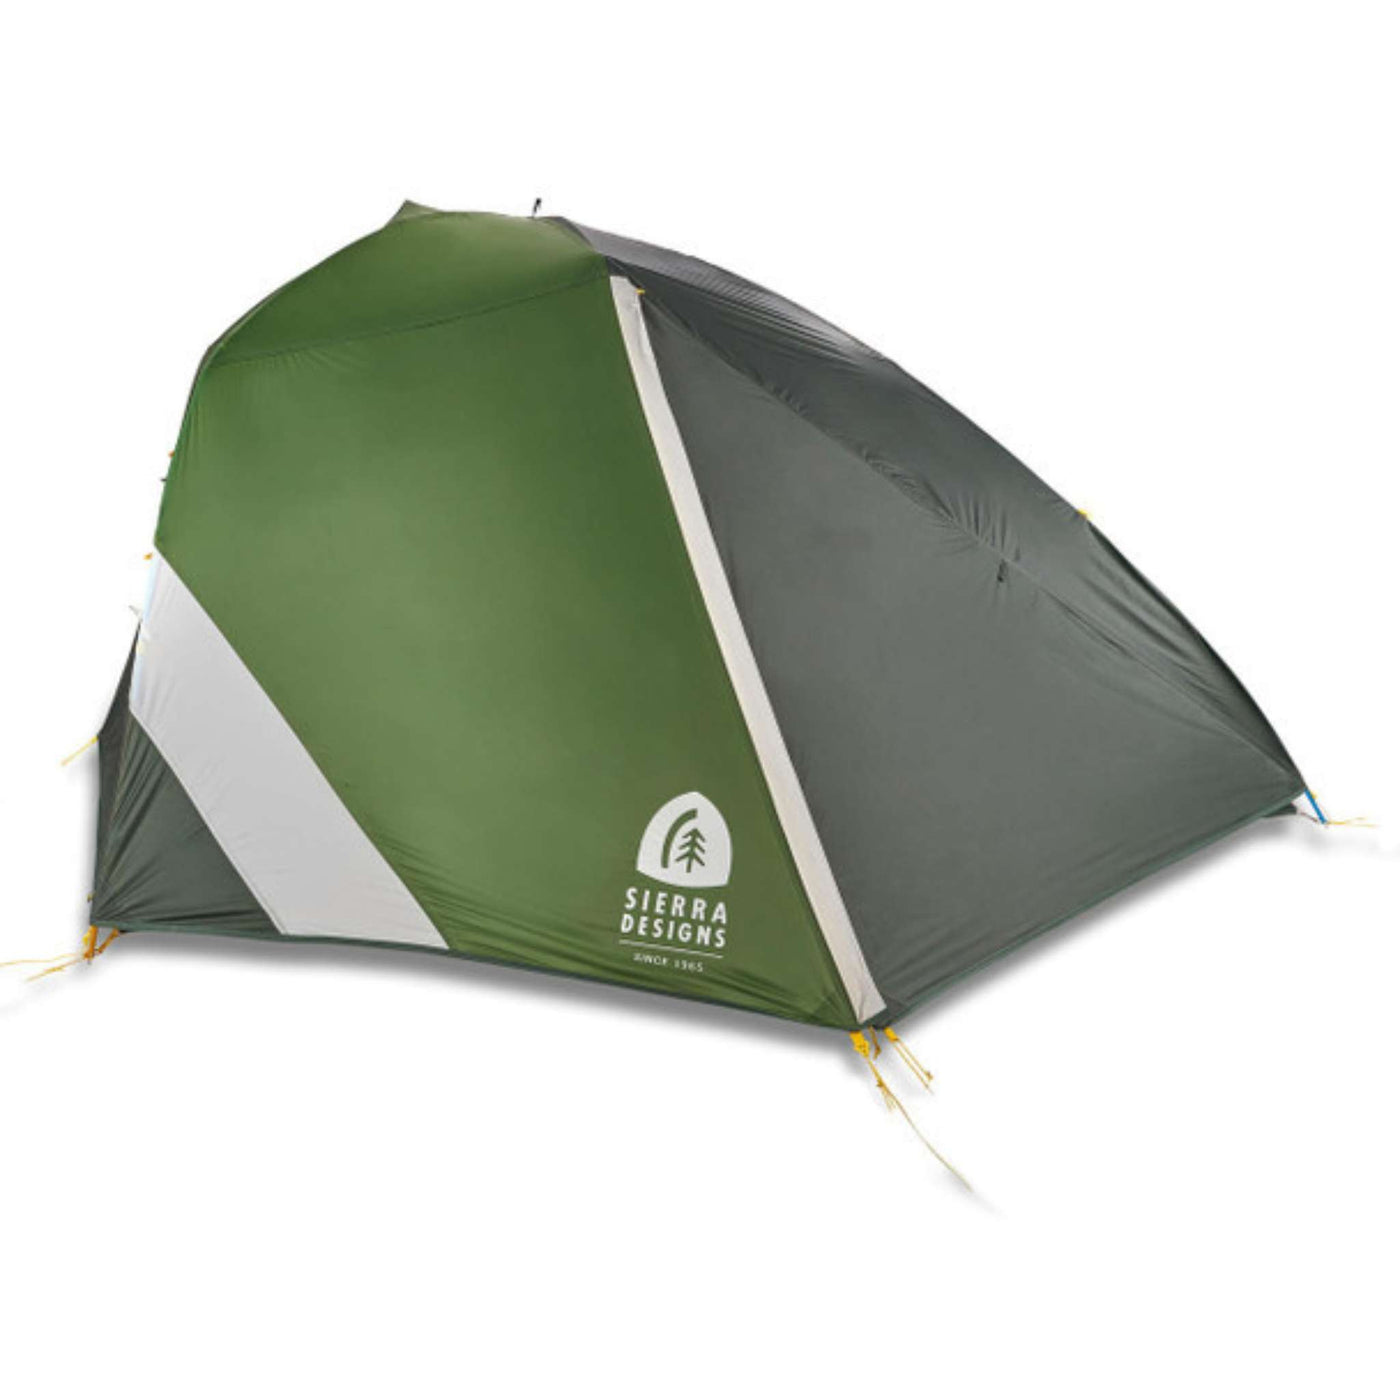 Sierra Designs Meteor Lite 3000 - 3 Tent | Tent NZ | Tramping 3 Person Backpacking Tent | Further Faster Christchurch NZ